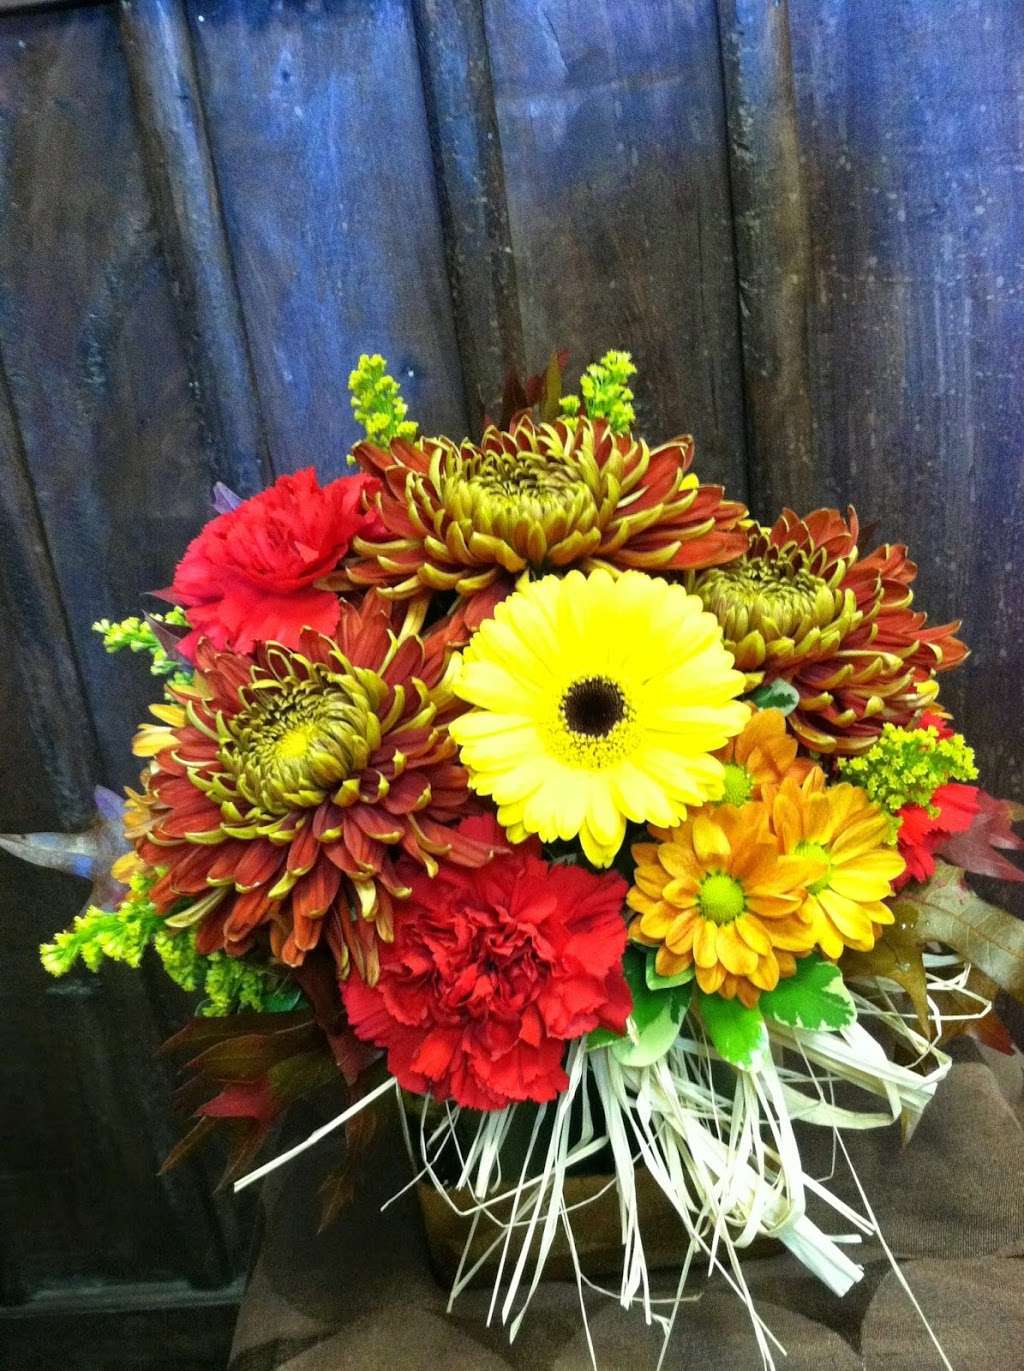 Anything Floral - florist  | Photo 10 of 10 | Address: 411 Springfield Ave, Berkeley Heights, NJ 07922, USA | Phone: (908) 464-5445